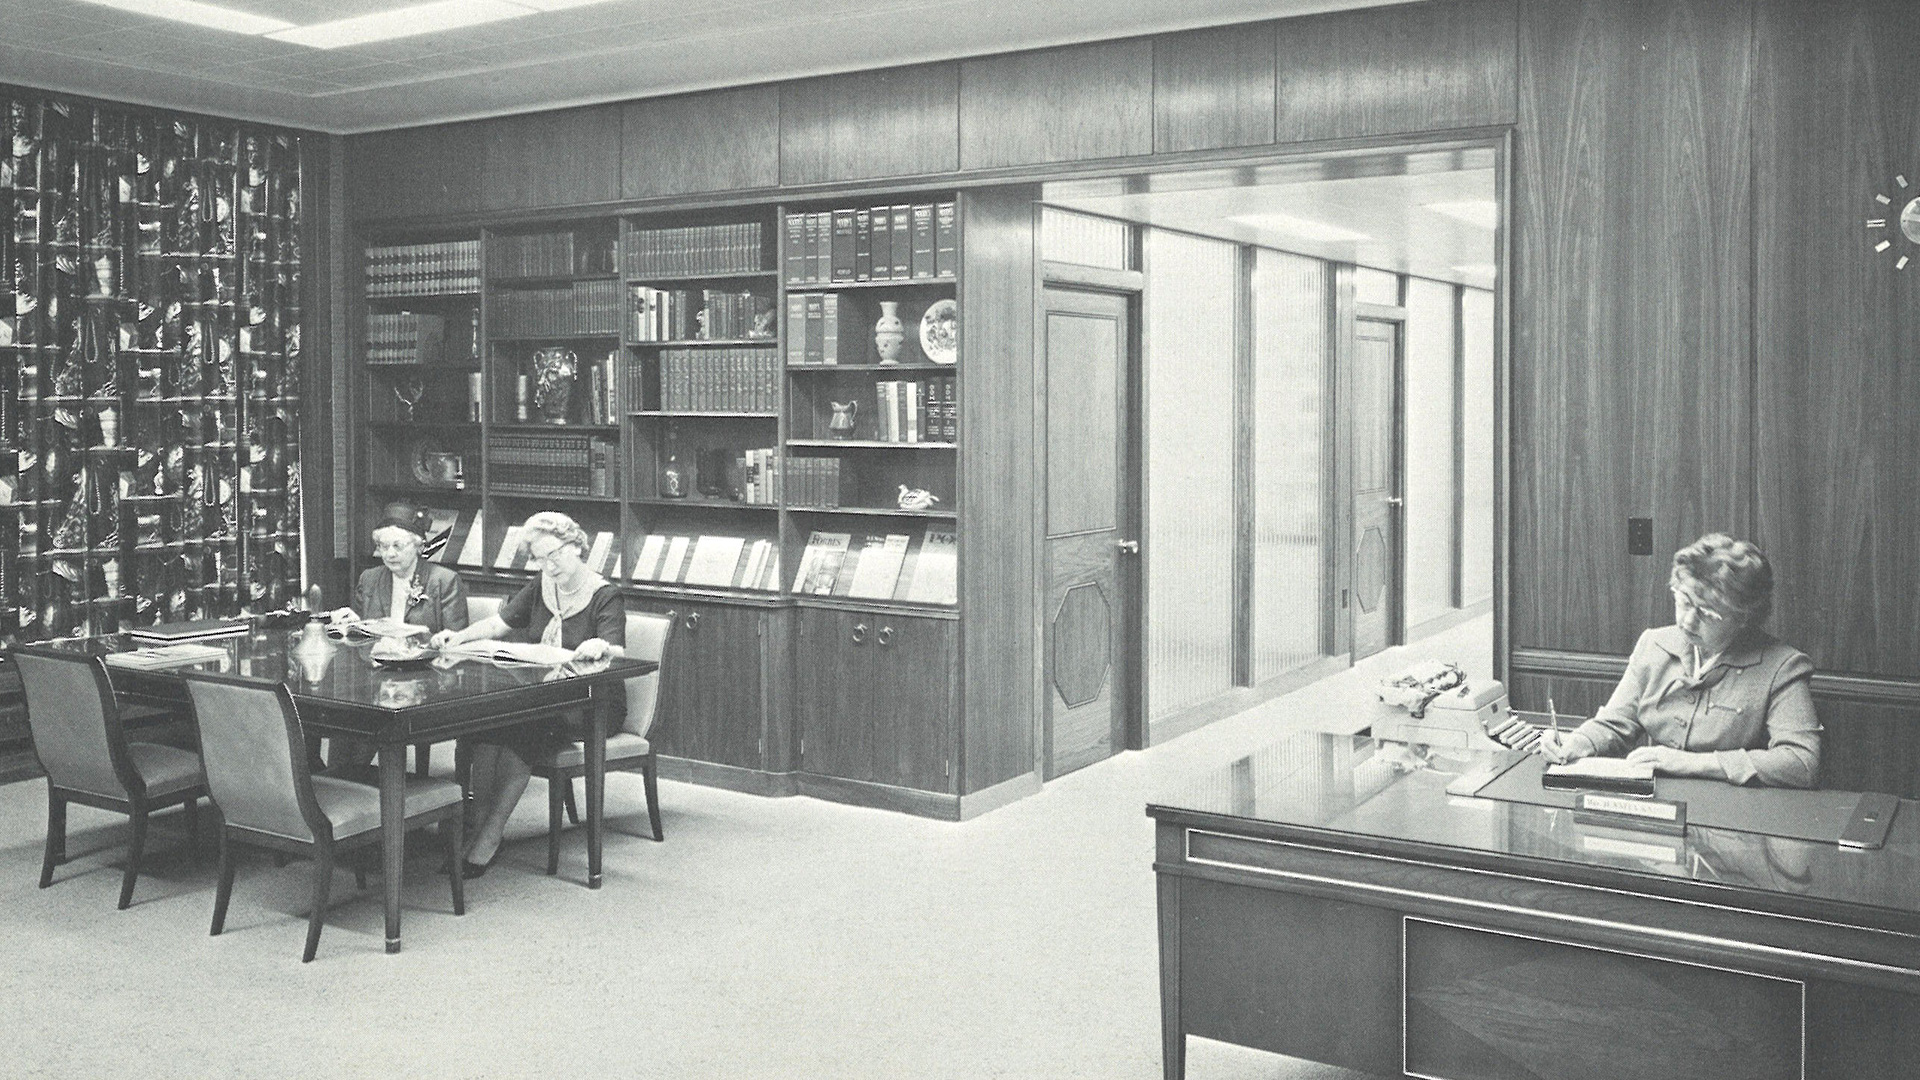 STRS Ohio waiting room in 1962